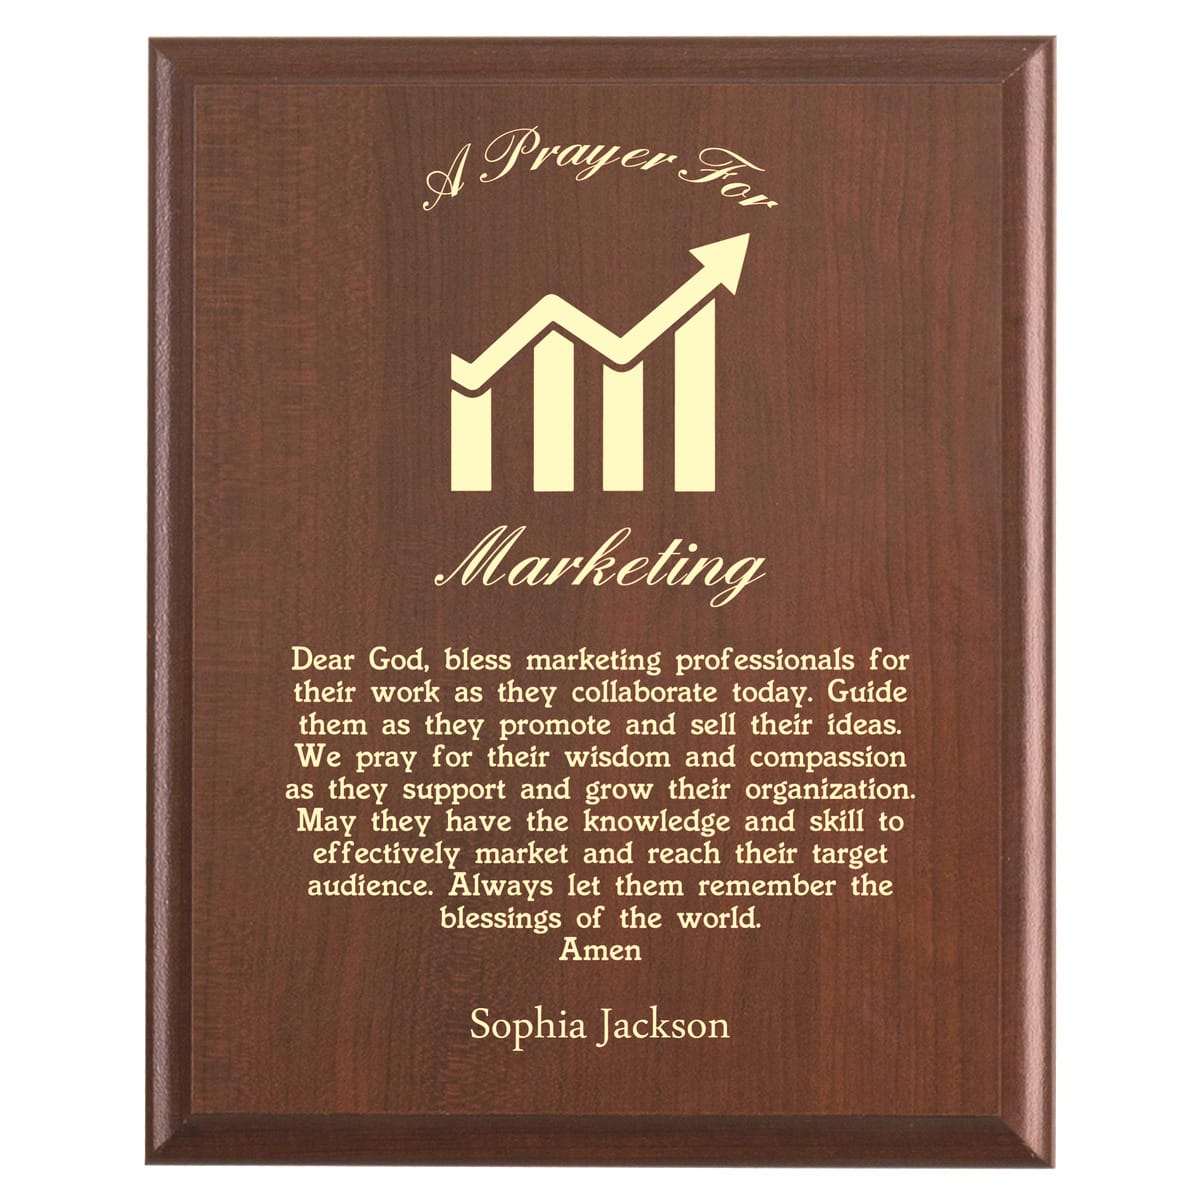 Plaque photo: Marketers Prayer Plaque design with free personalization. Wood style finish with customized text.